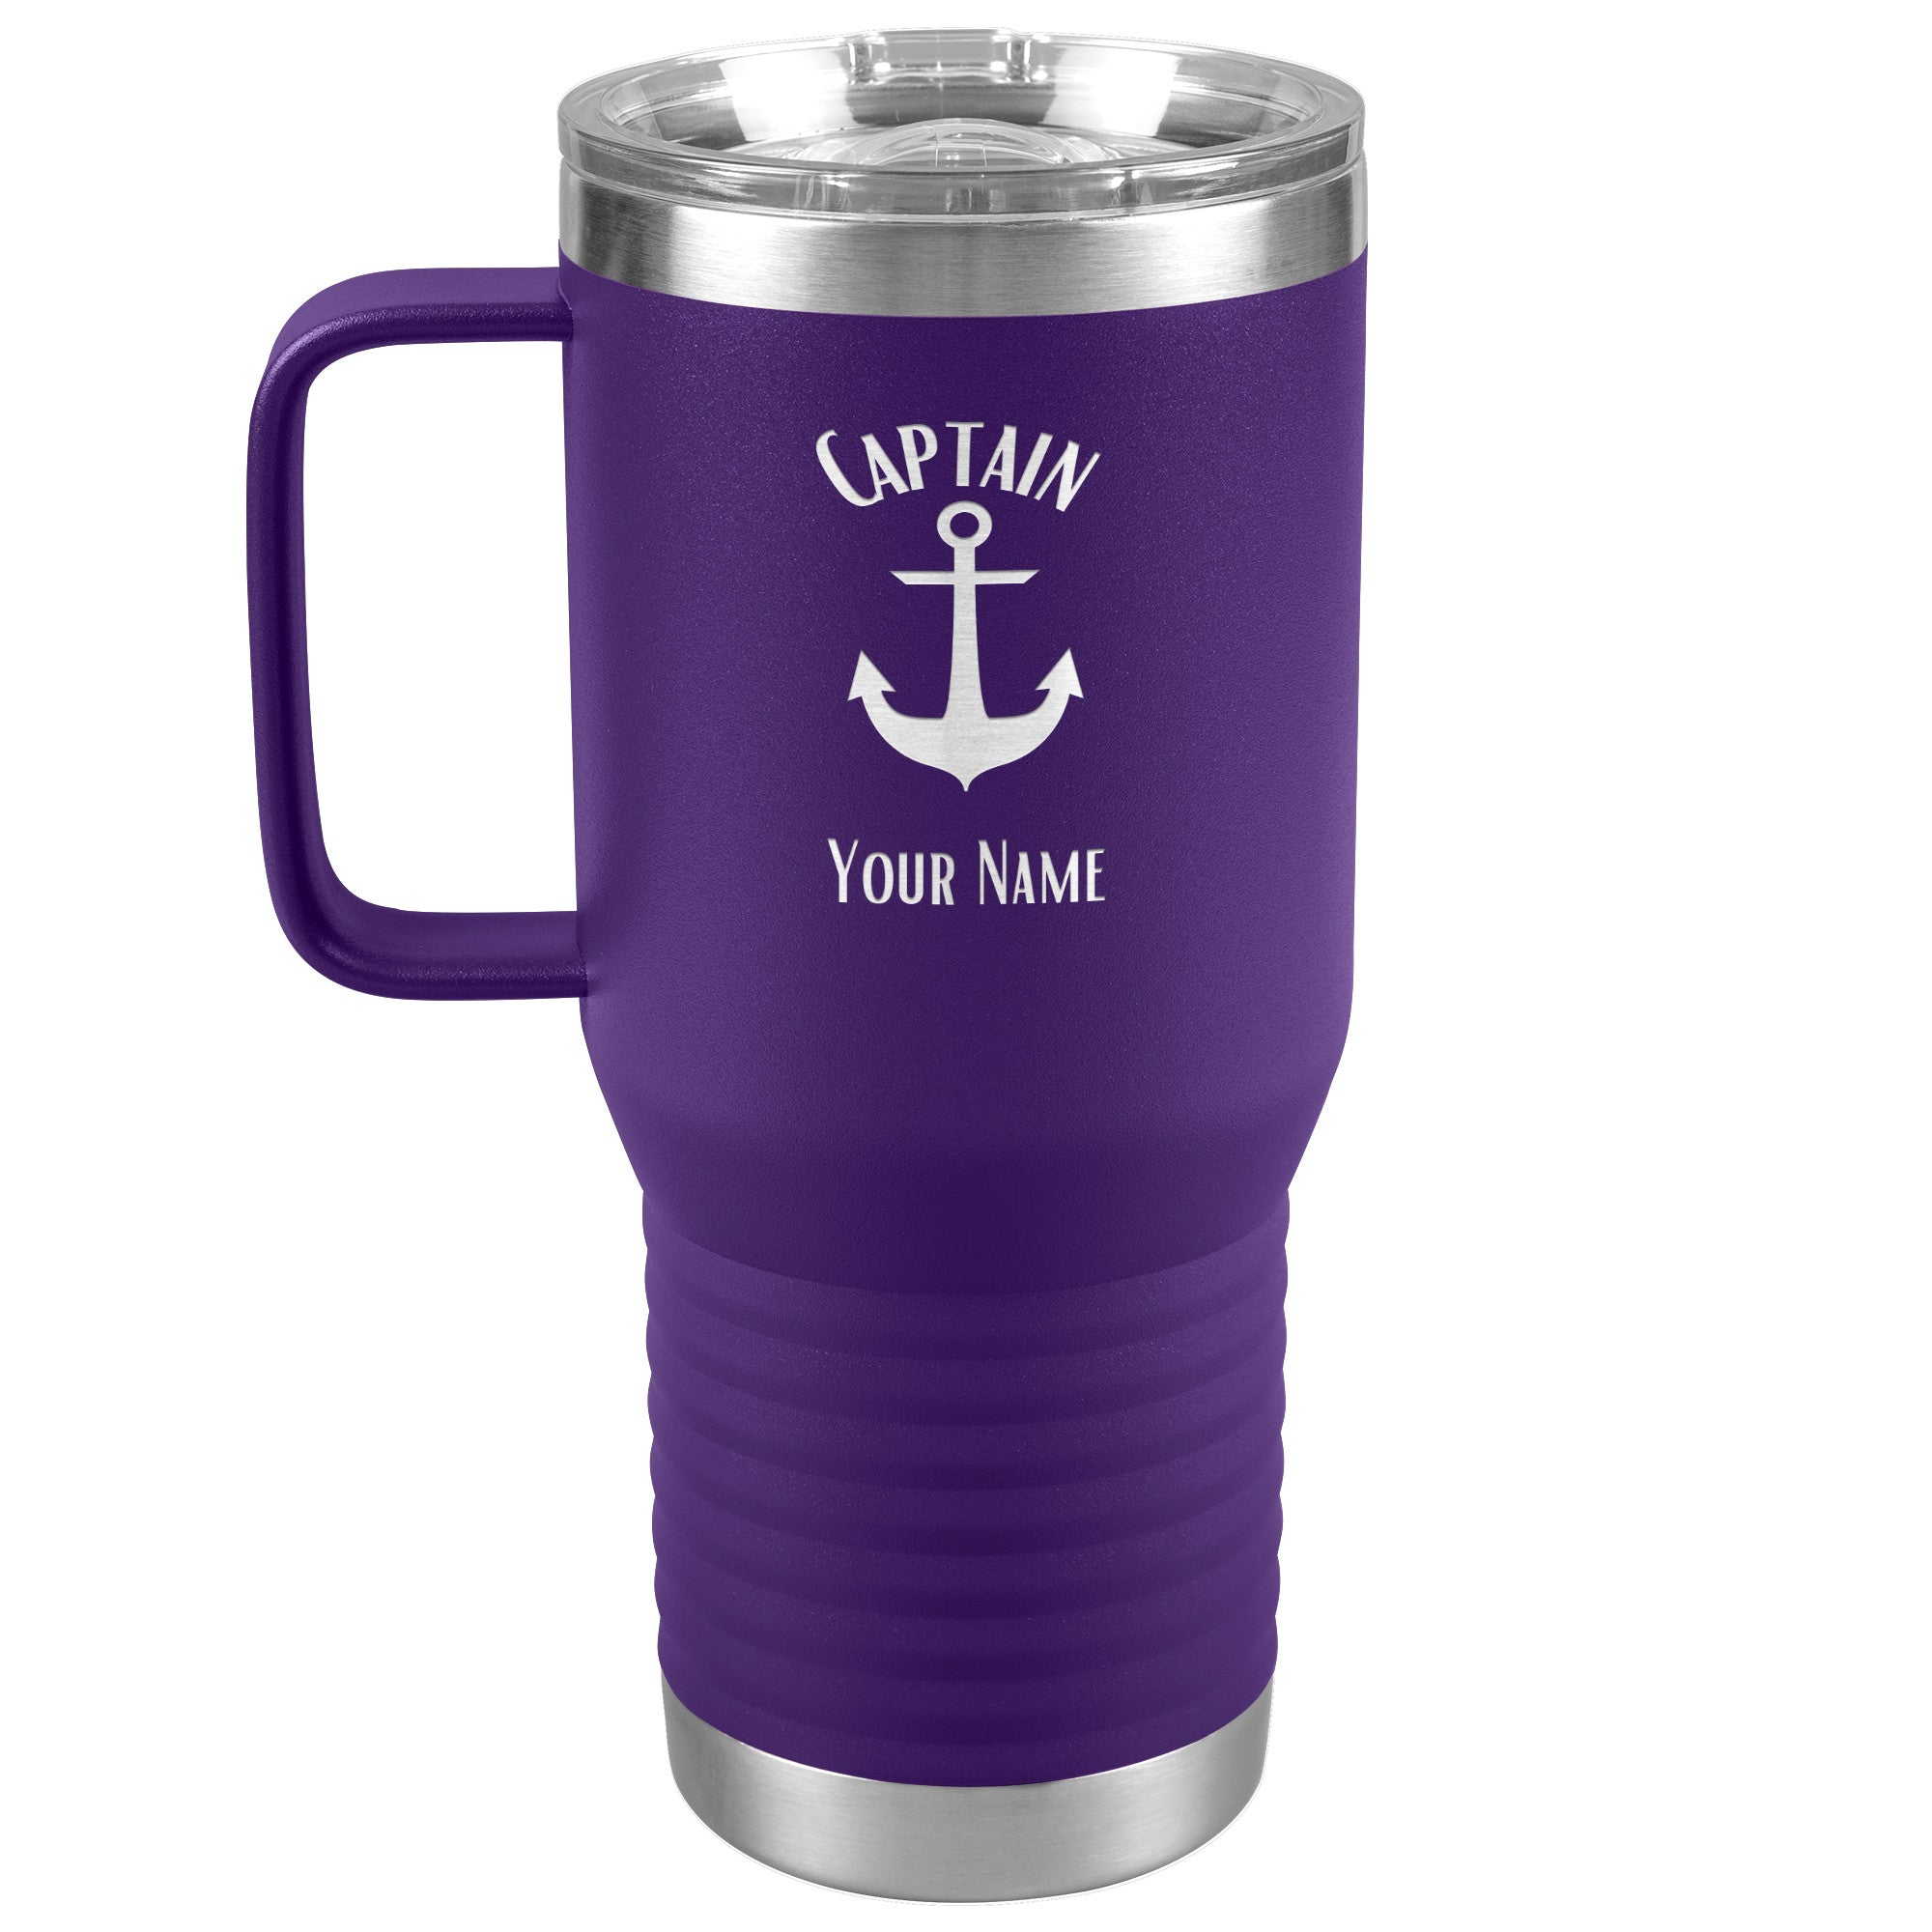 Boat Captain Wine Tumbler, Boat Gifts, Boating Wine Glass, Personalized  Sailing Nautical Gift for Men Women Dad Boat Owner Cup 12 Oz T221A -   Canada